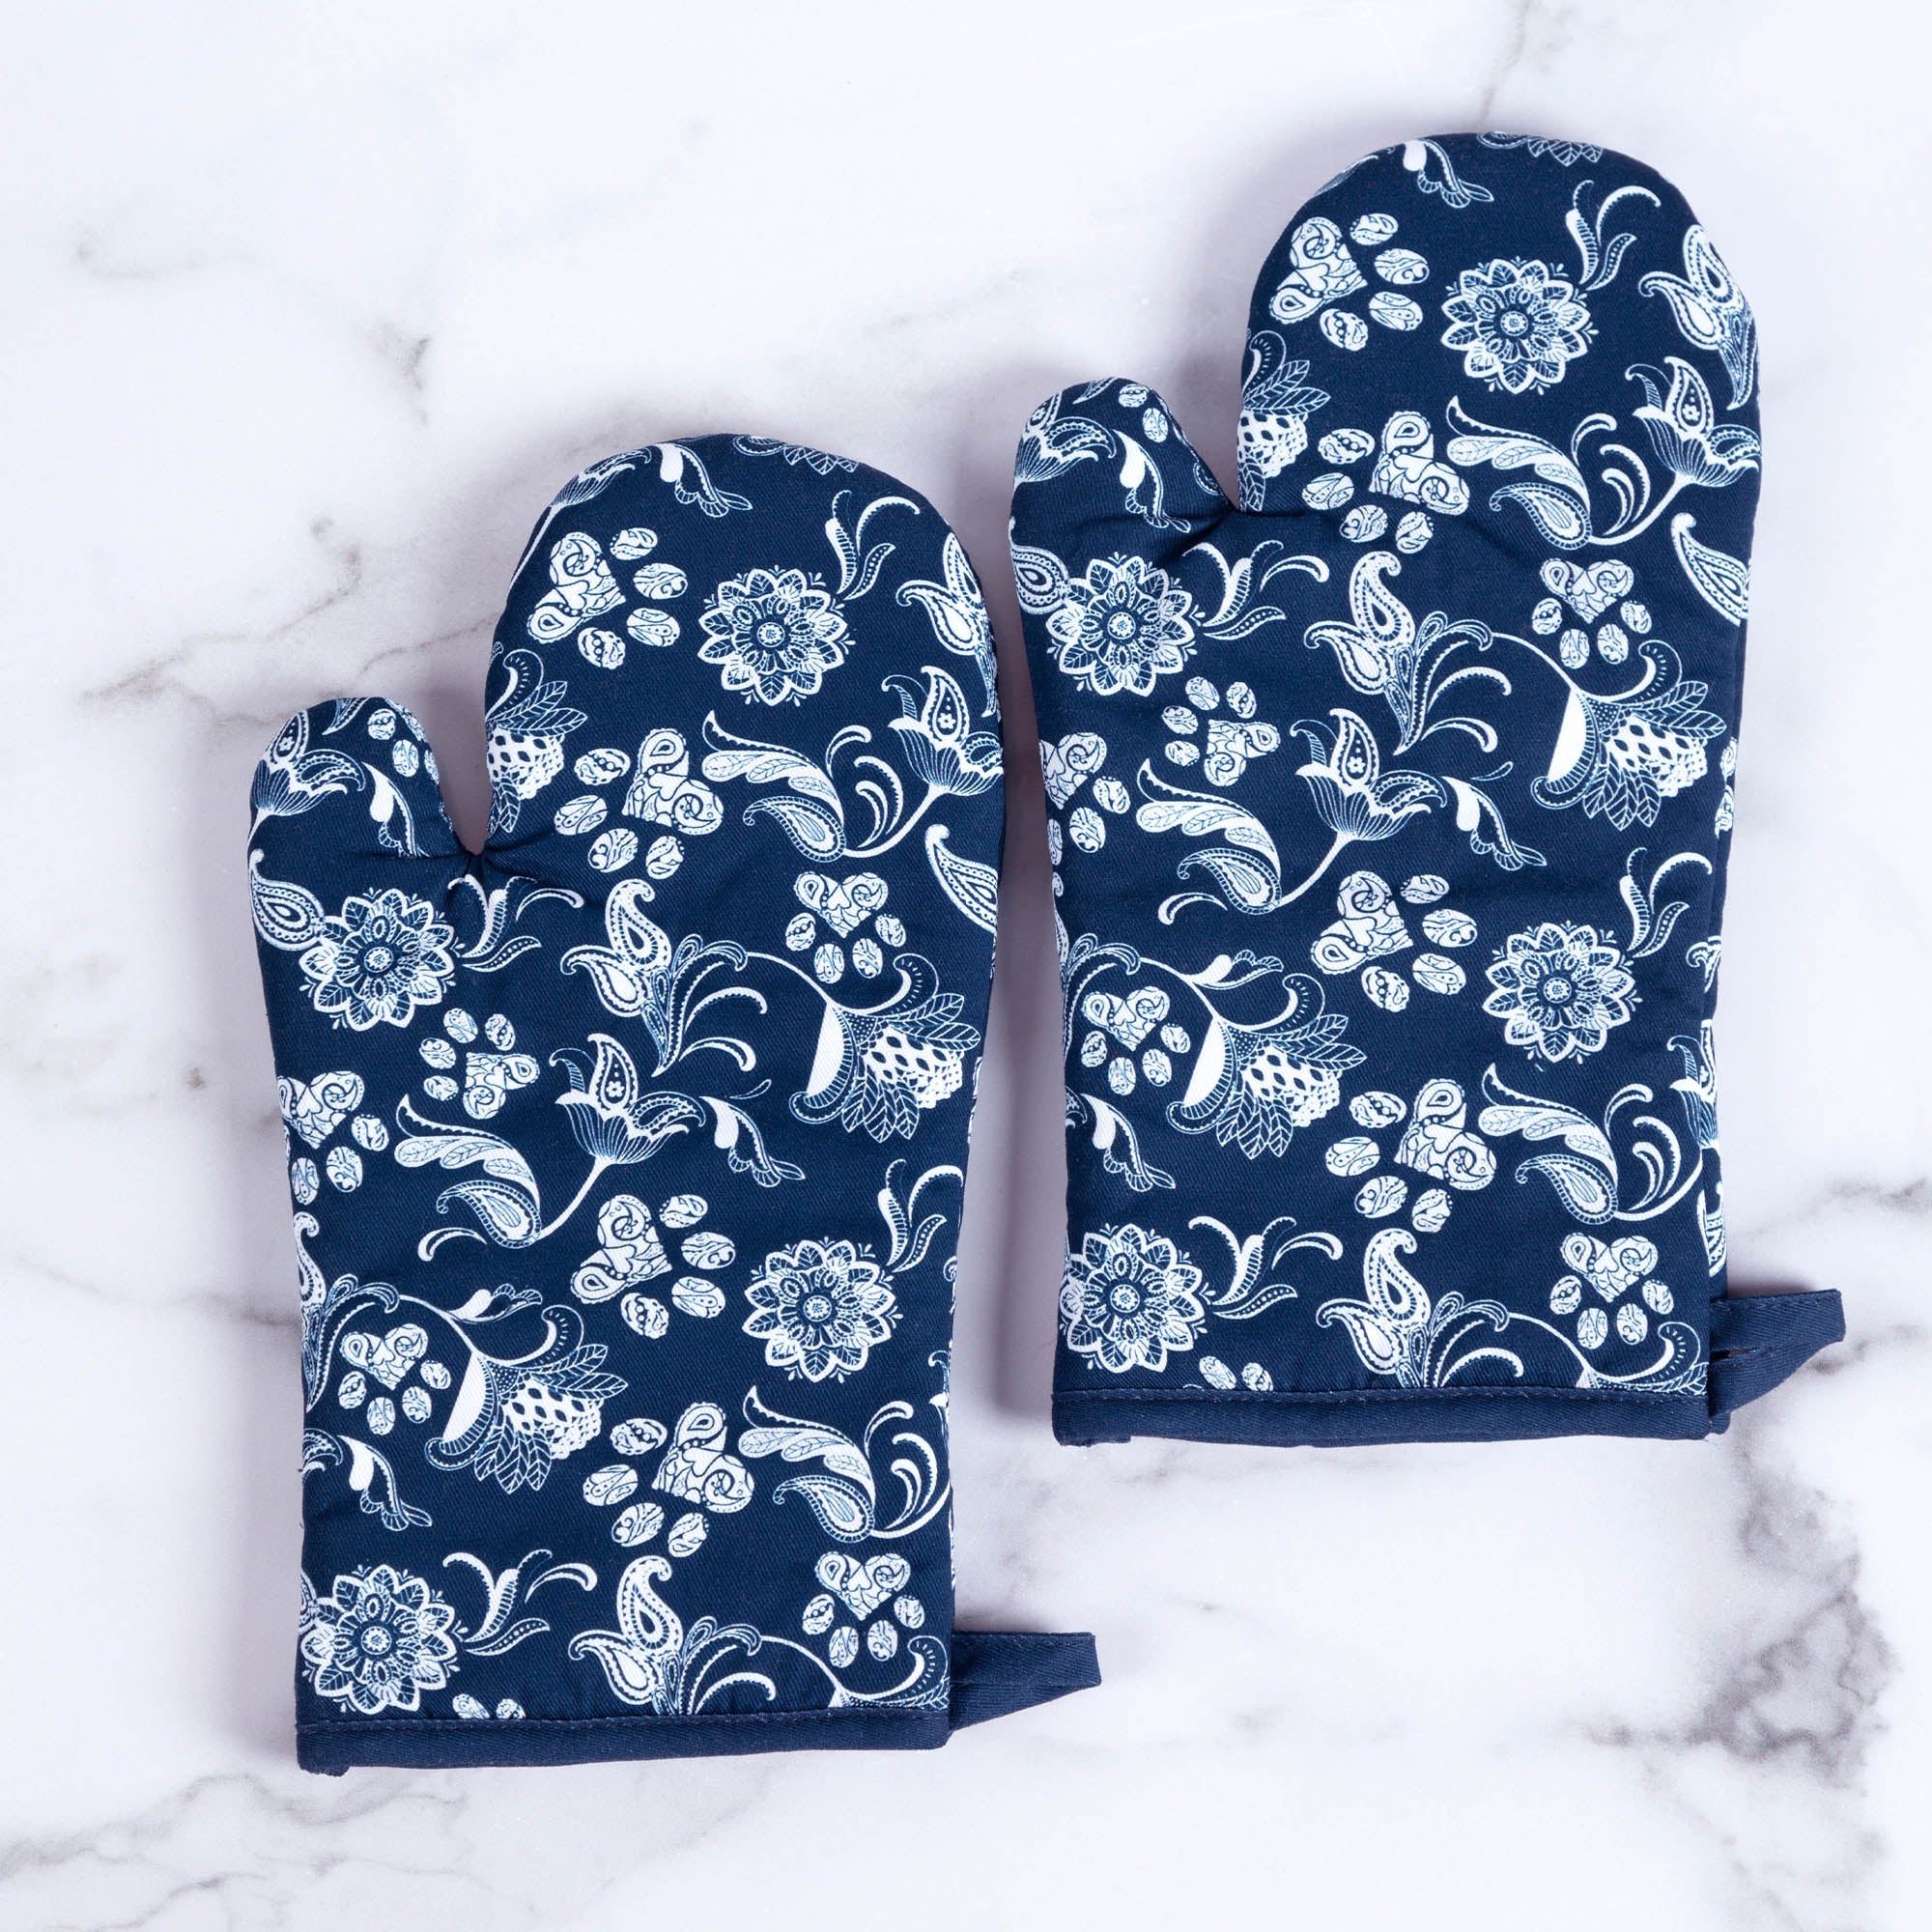 Blue Paisley Paws Kitchen Linens - Oven Mitts - Set Of 2